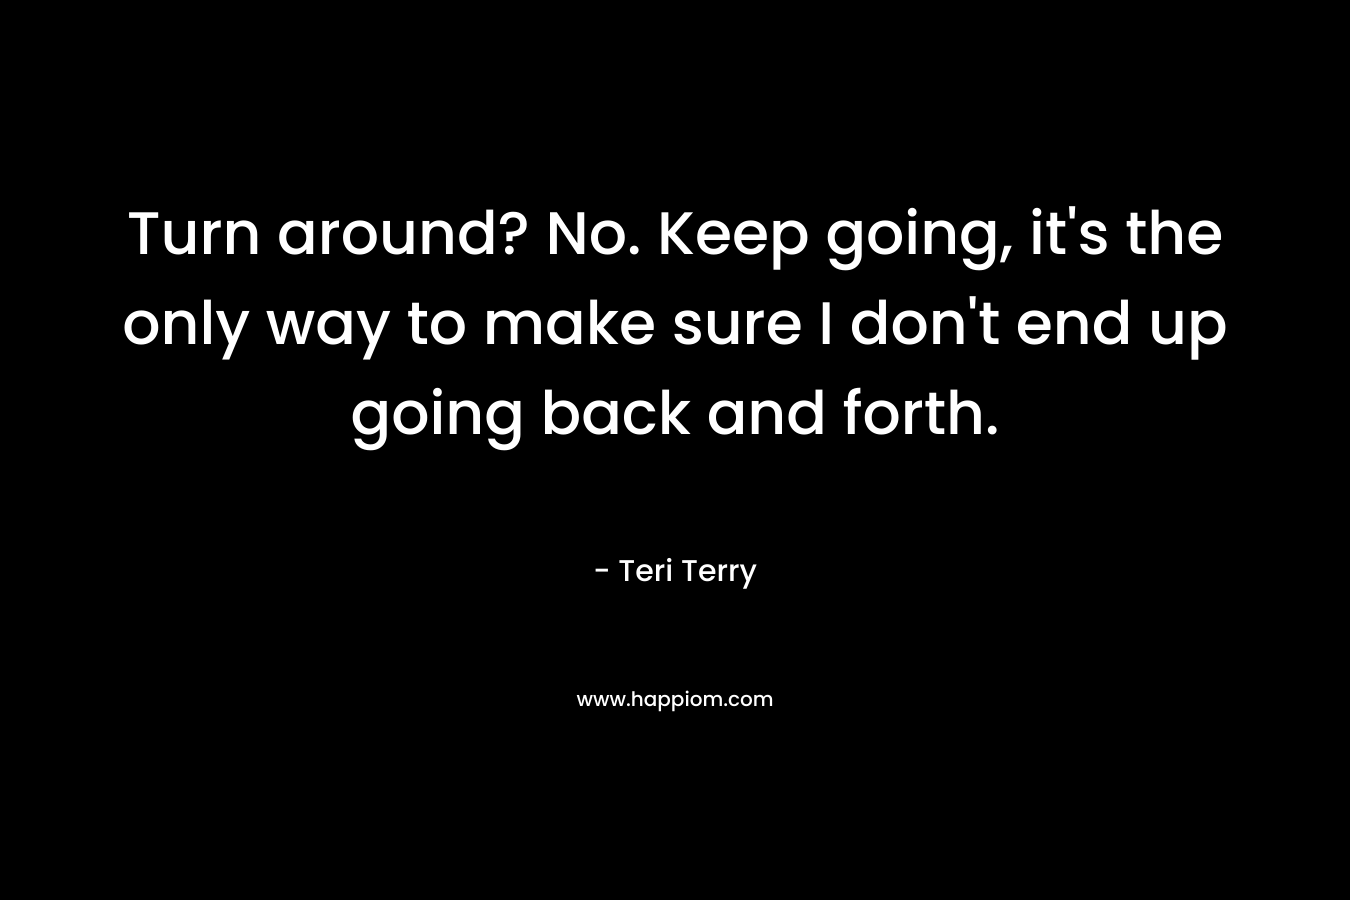 Turn around? No. Keep going, it's the only way to make sure I don't end up going back and forth.